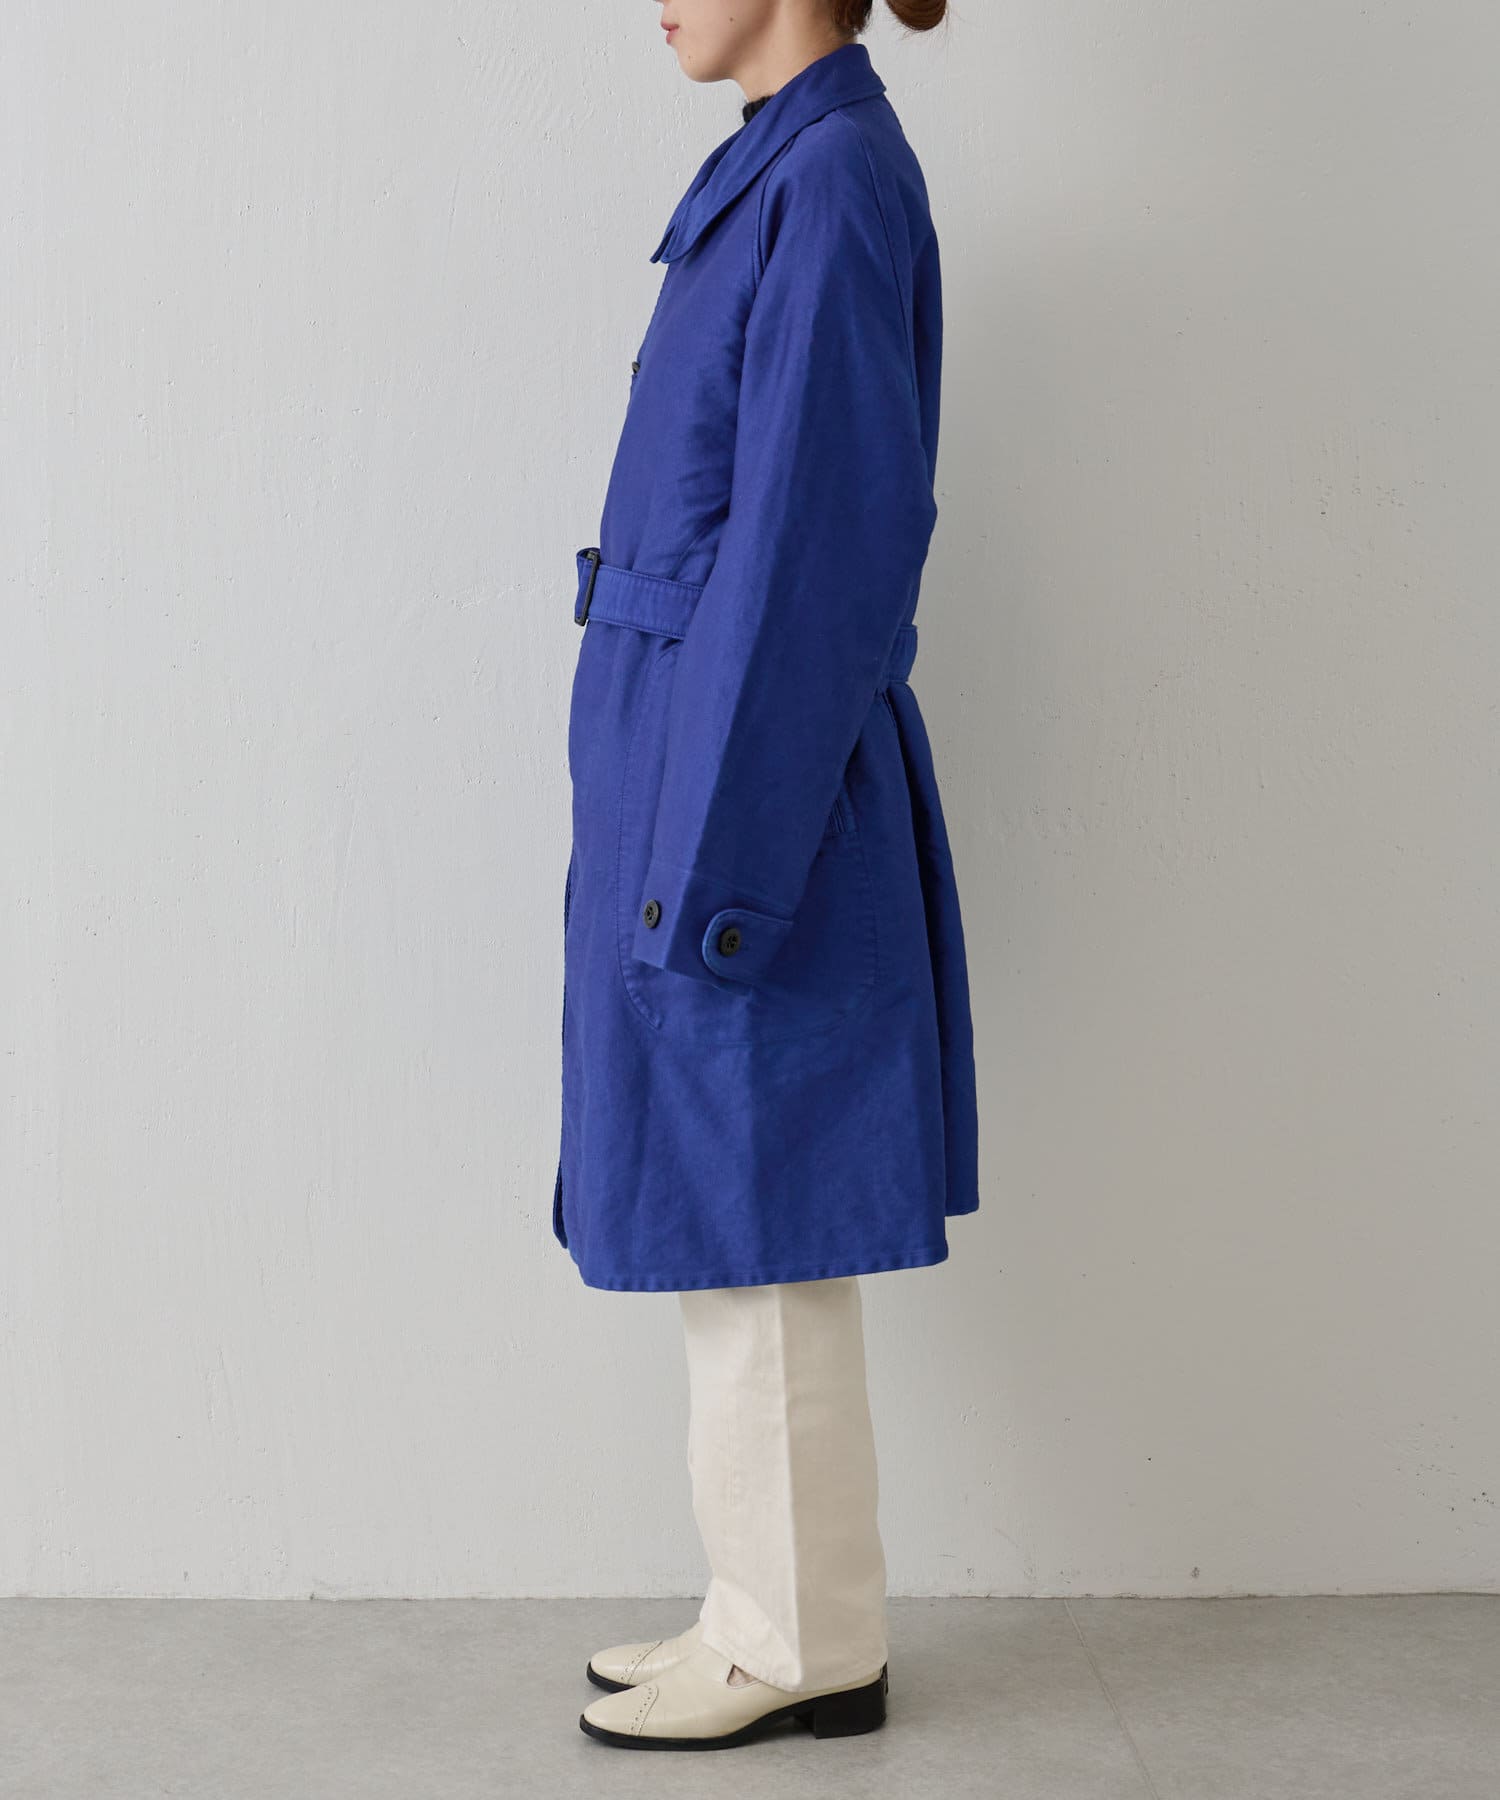 OUTIL for BLOOM&BRANCH / MANTEAU